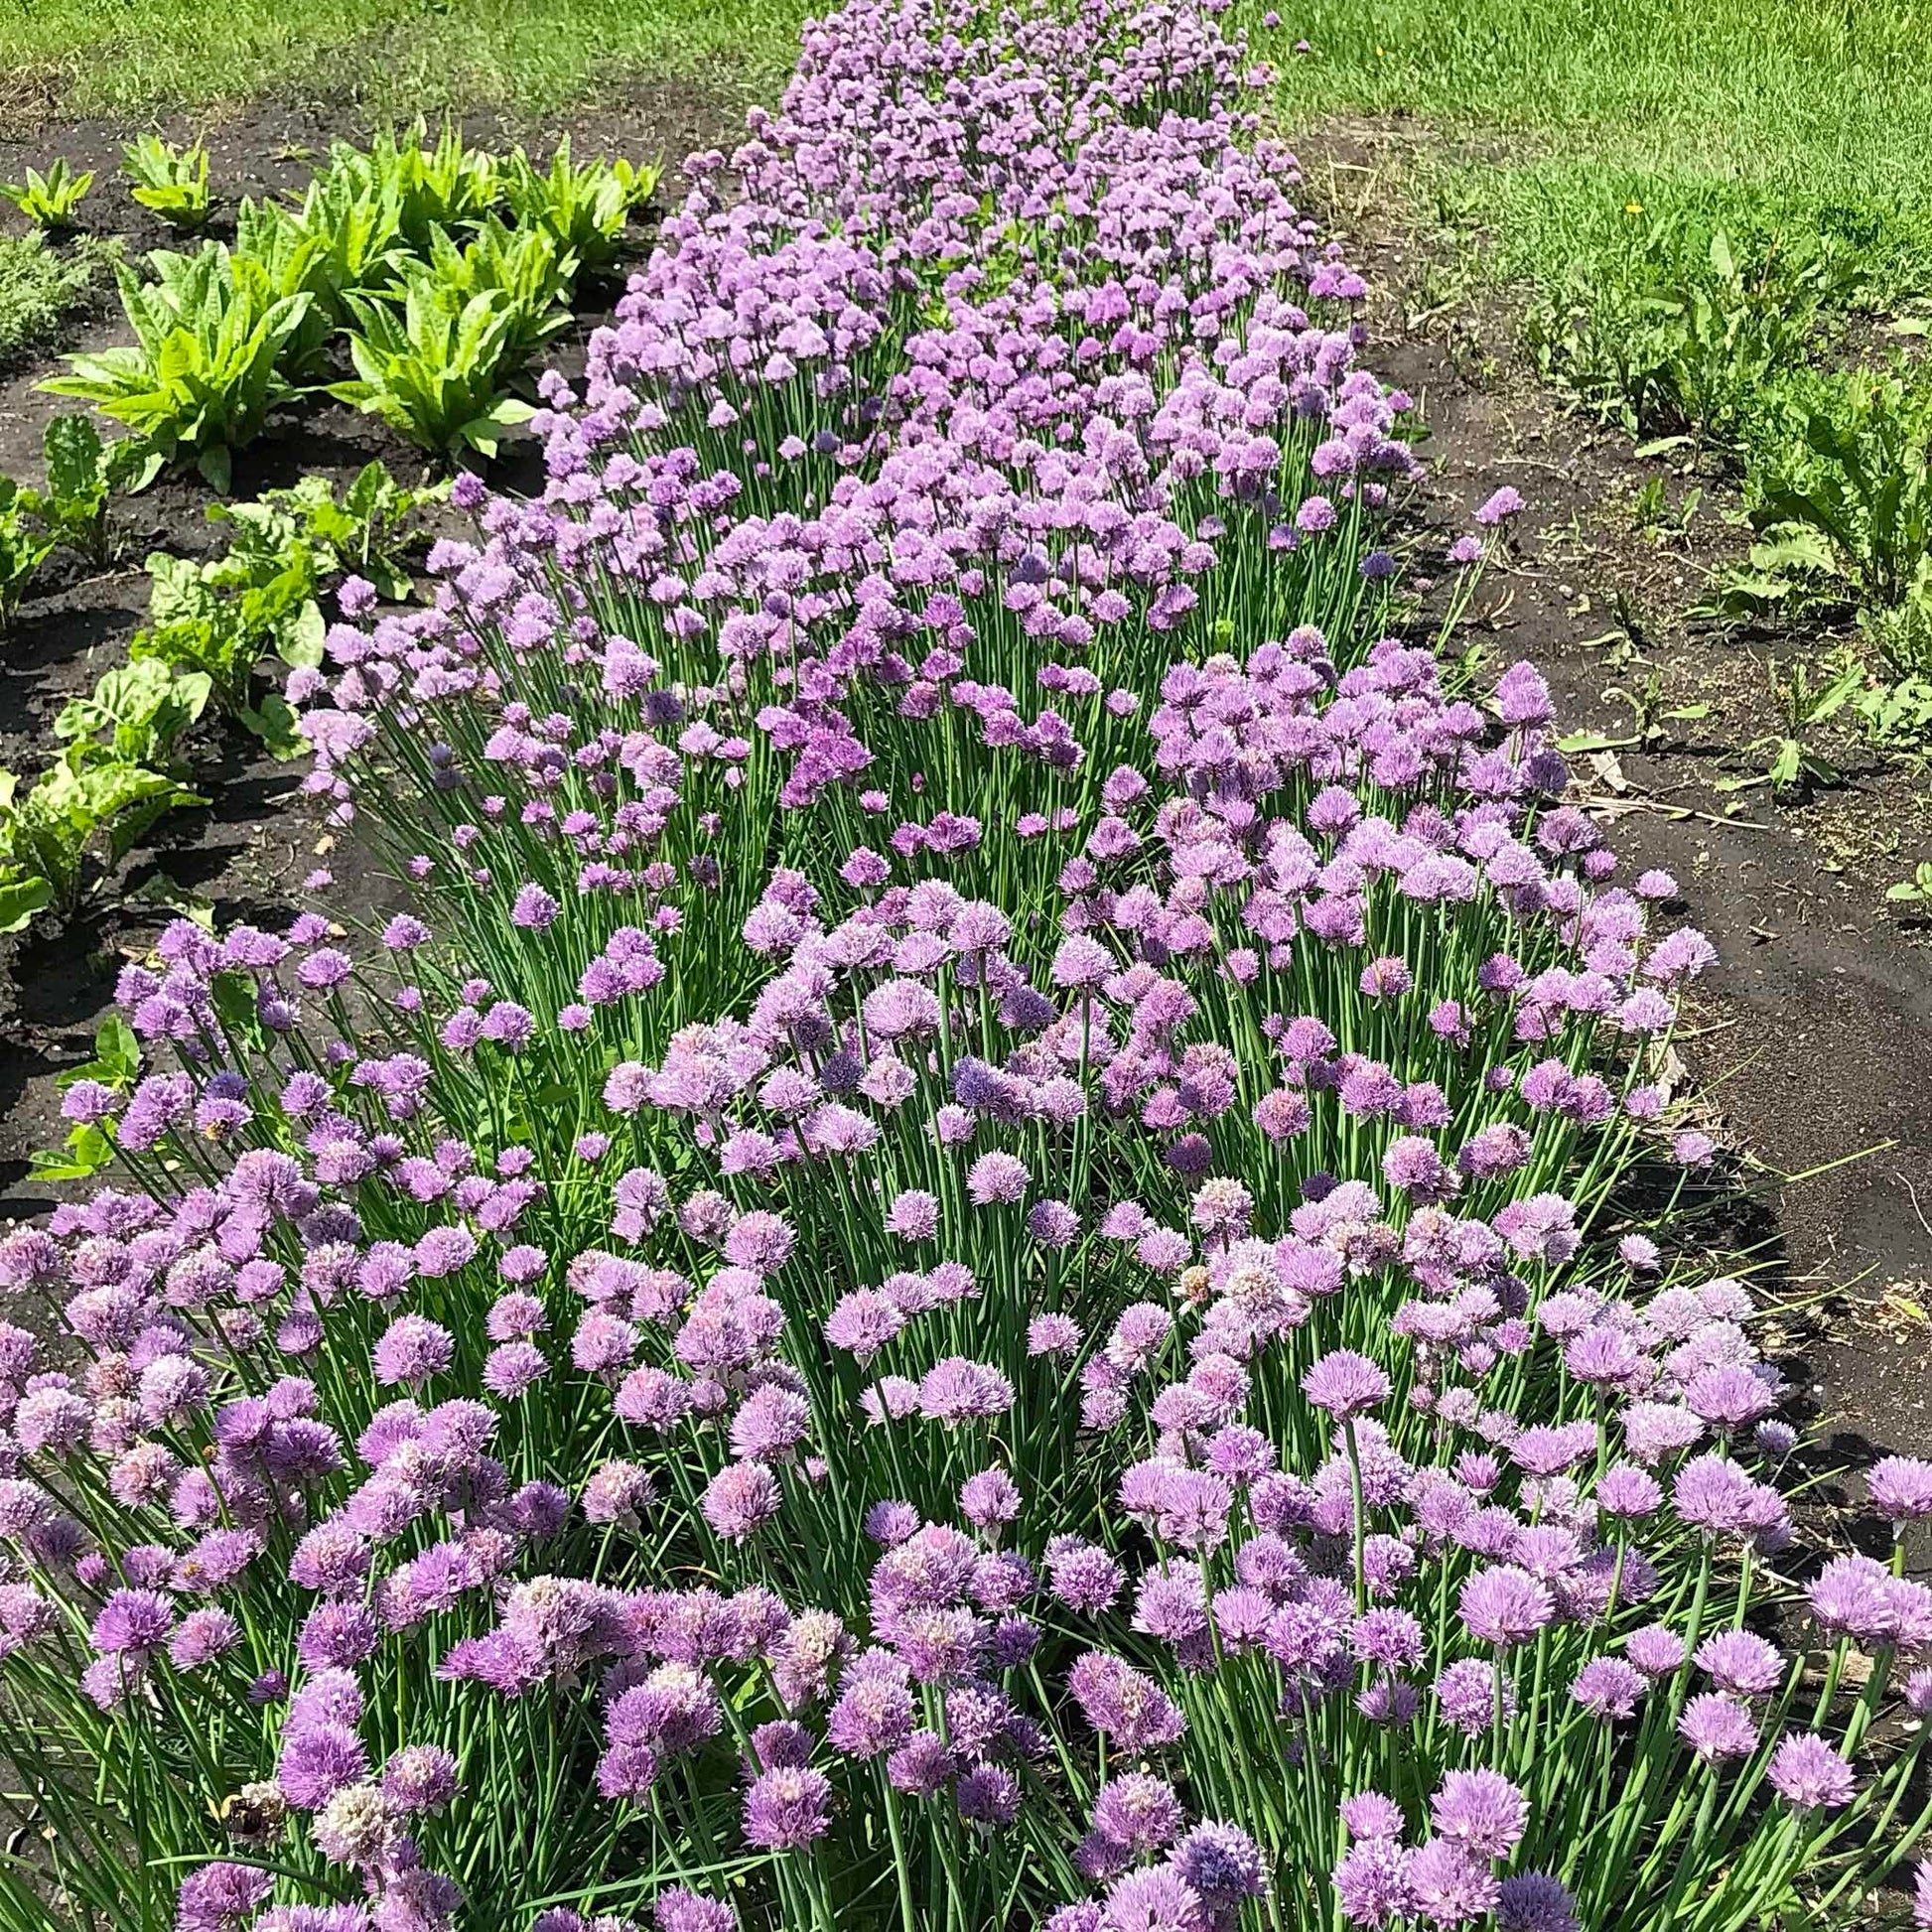 Bed of chives in full bloom with beautiful lavender flowers.